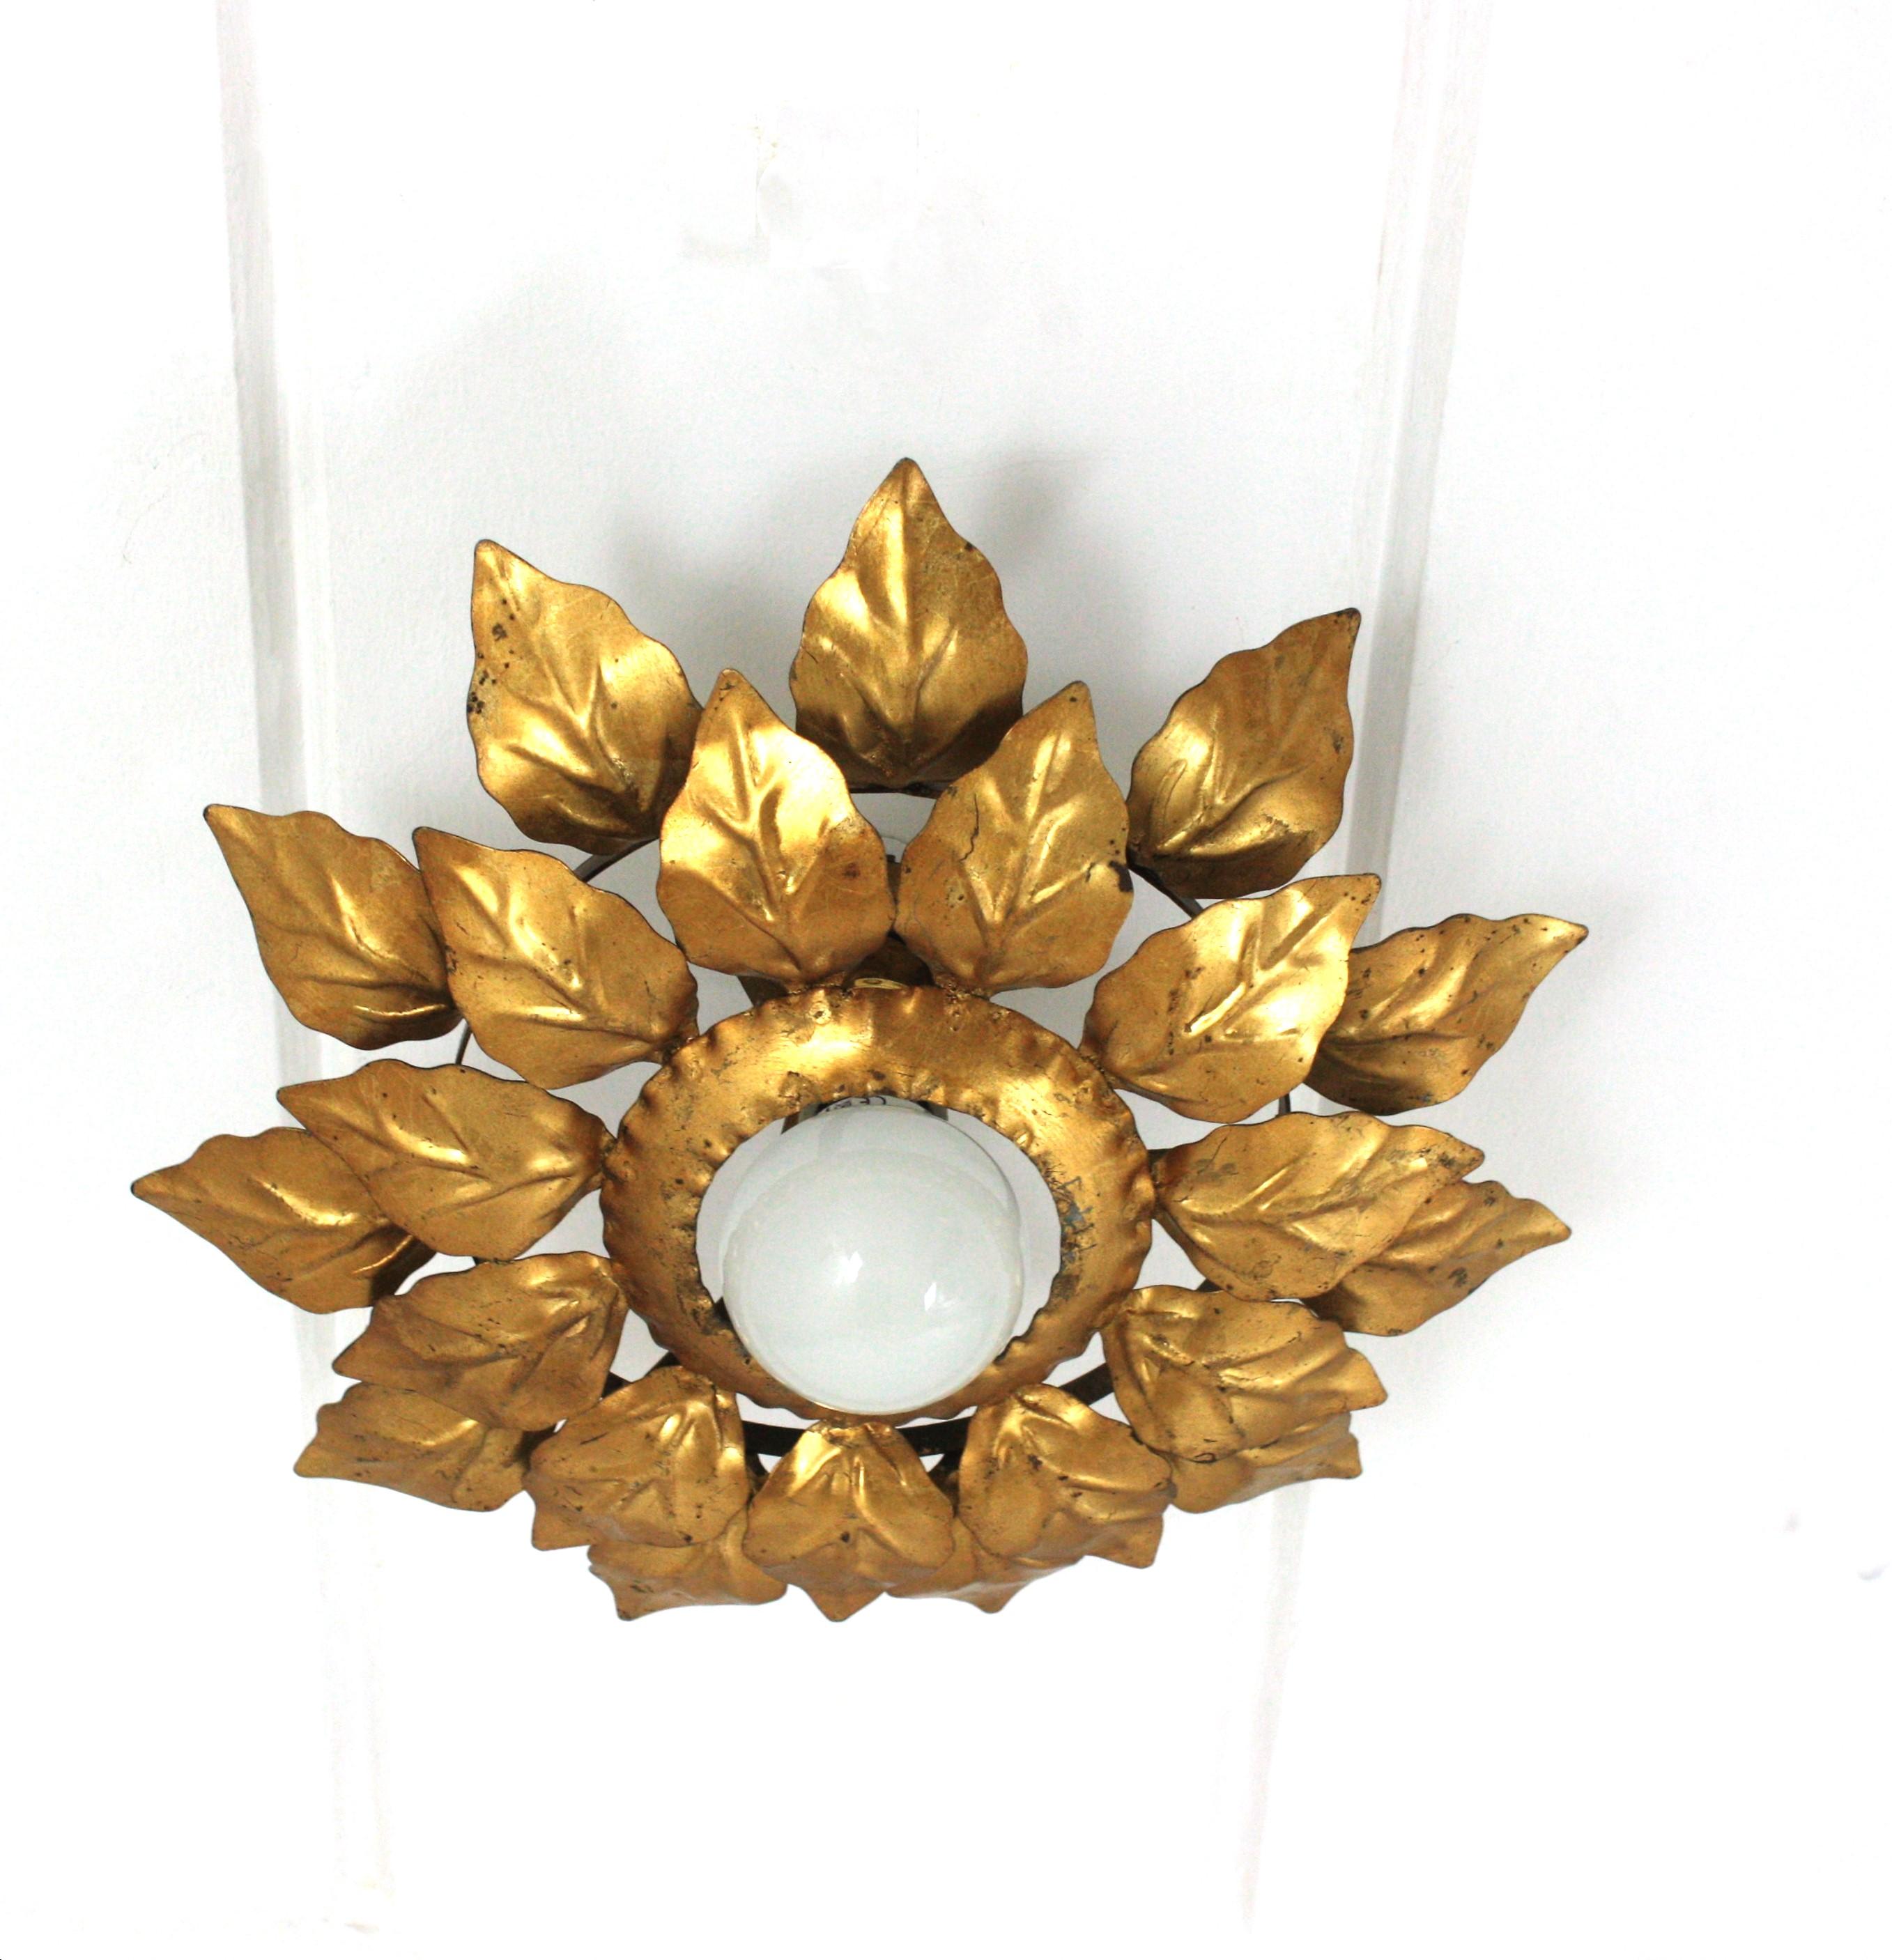 Gilt metal double layered leafed sunburst ceiling flush mount. Spain, 1960s.
An eye-catching sunburst or flower burst ceiling light featuring two layers of gilt iron leaves surrounding a central exposed bulb.
Original gold leaf gilding and nice